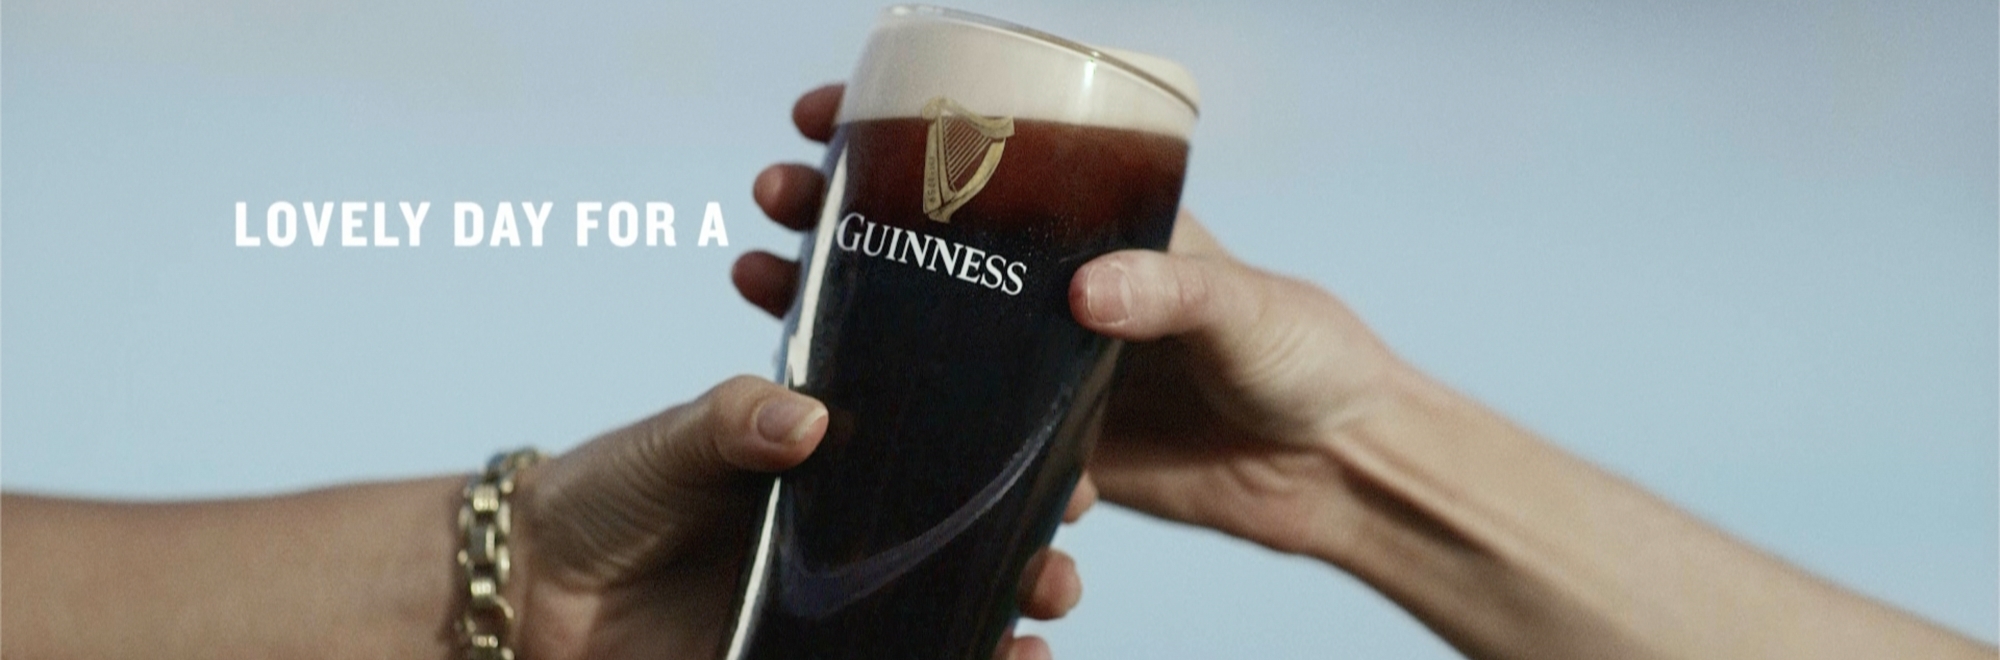 It's a ‘Lovely Day For a Guinness’ in new ad by AMV BBDO